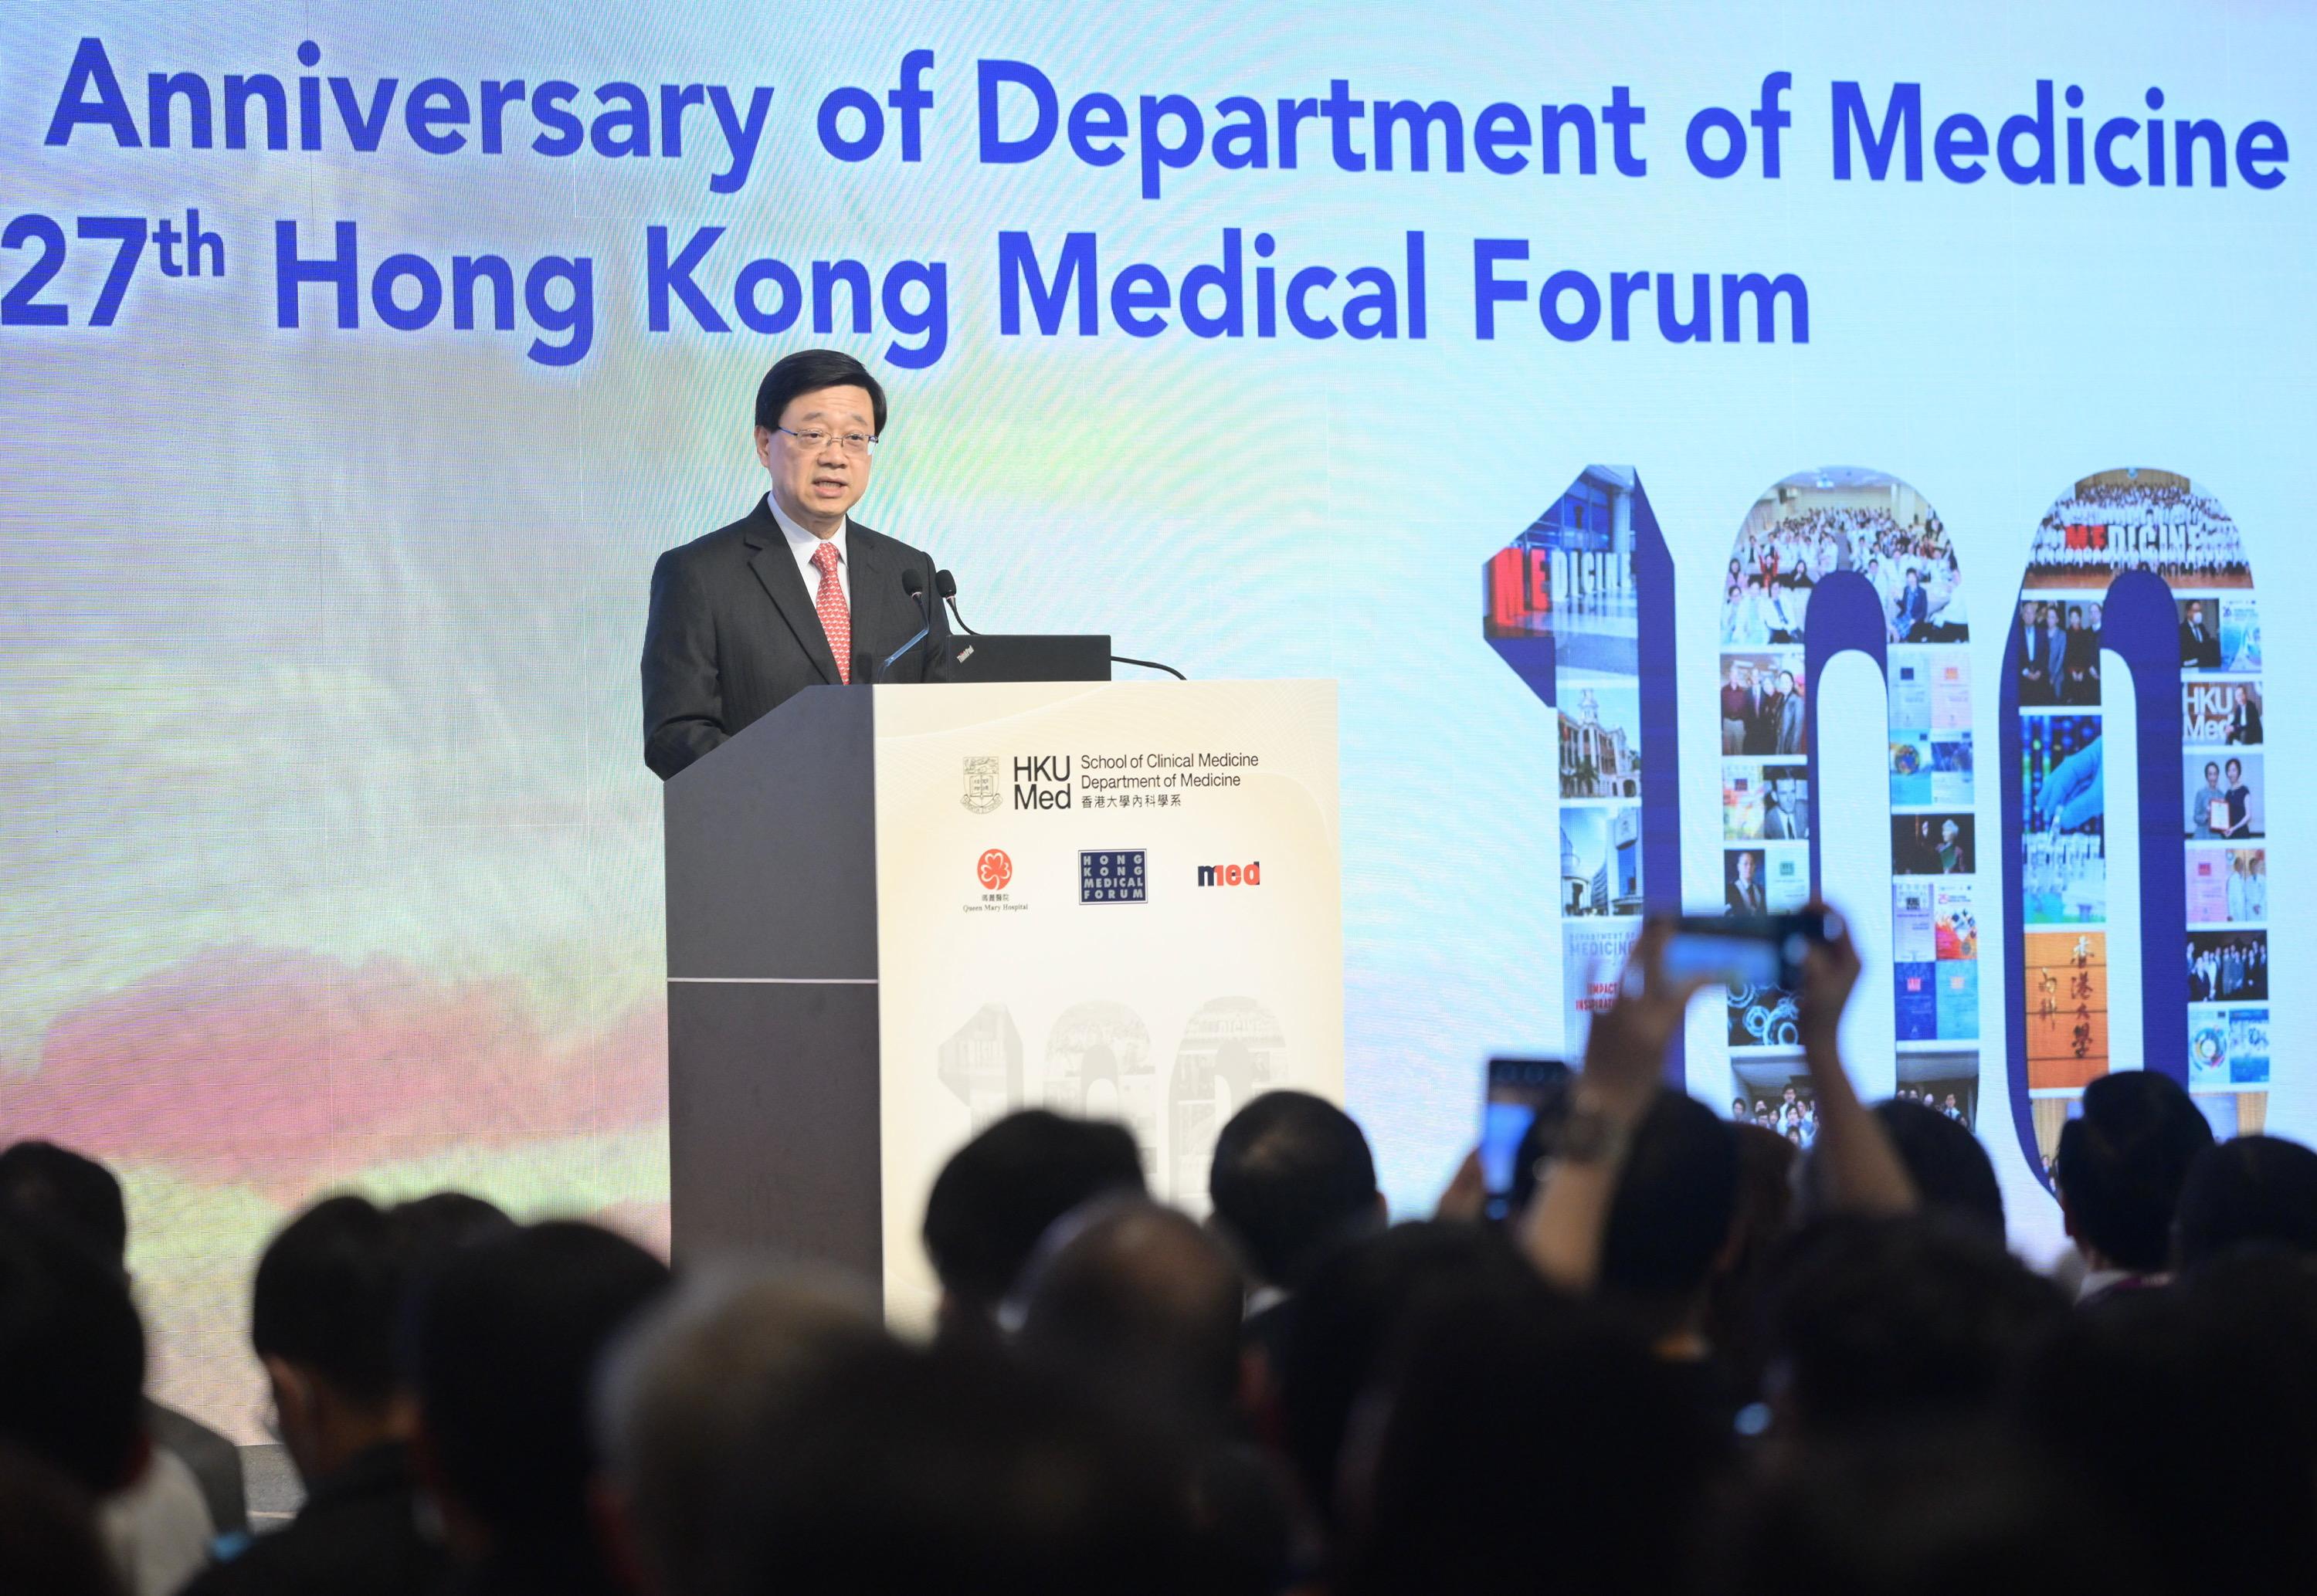 The Chief Executive, Mr John Lee, speaks at the Kick-off Ceremony of the 100th Anniversary of the Deparment of Medicine of the Li Ka Shing Faculty of Medicine of the University of Hong Kong cum the Opening of 27th Hong Kong Medical Forum today (May 13).